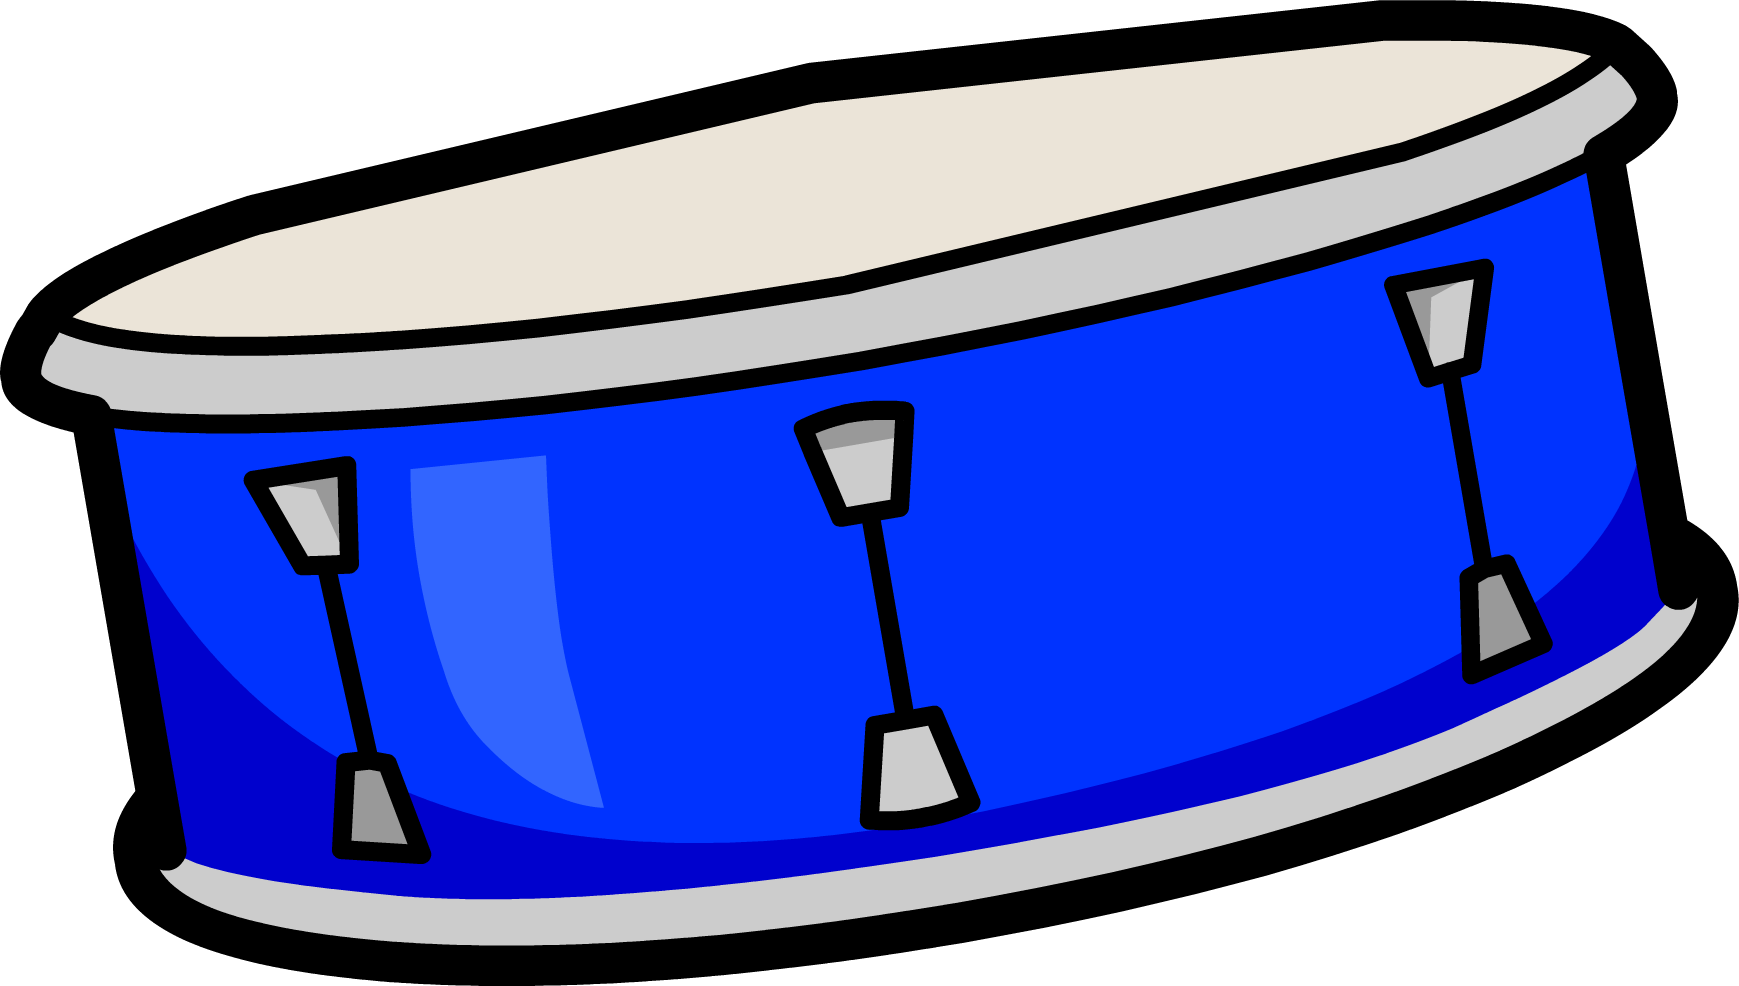 marching snare drum clipart - Clip Art Library.